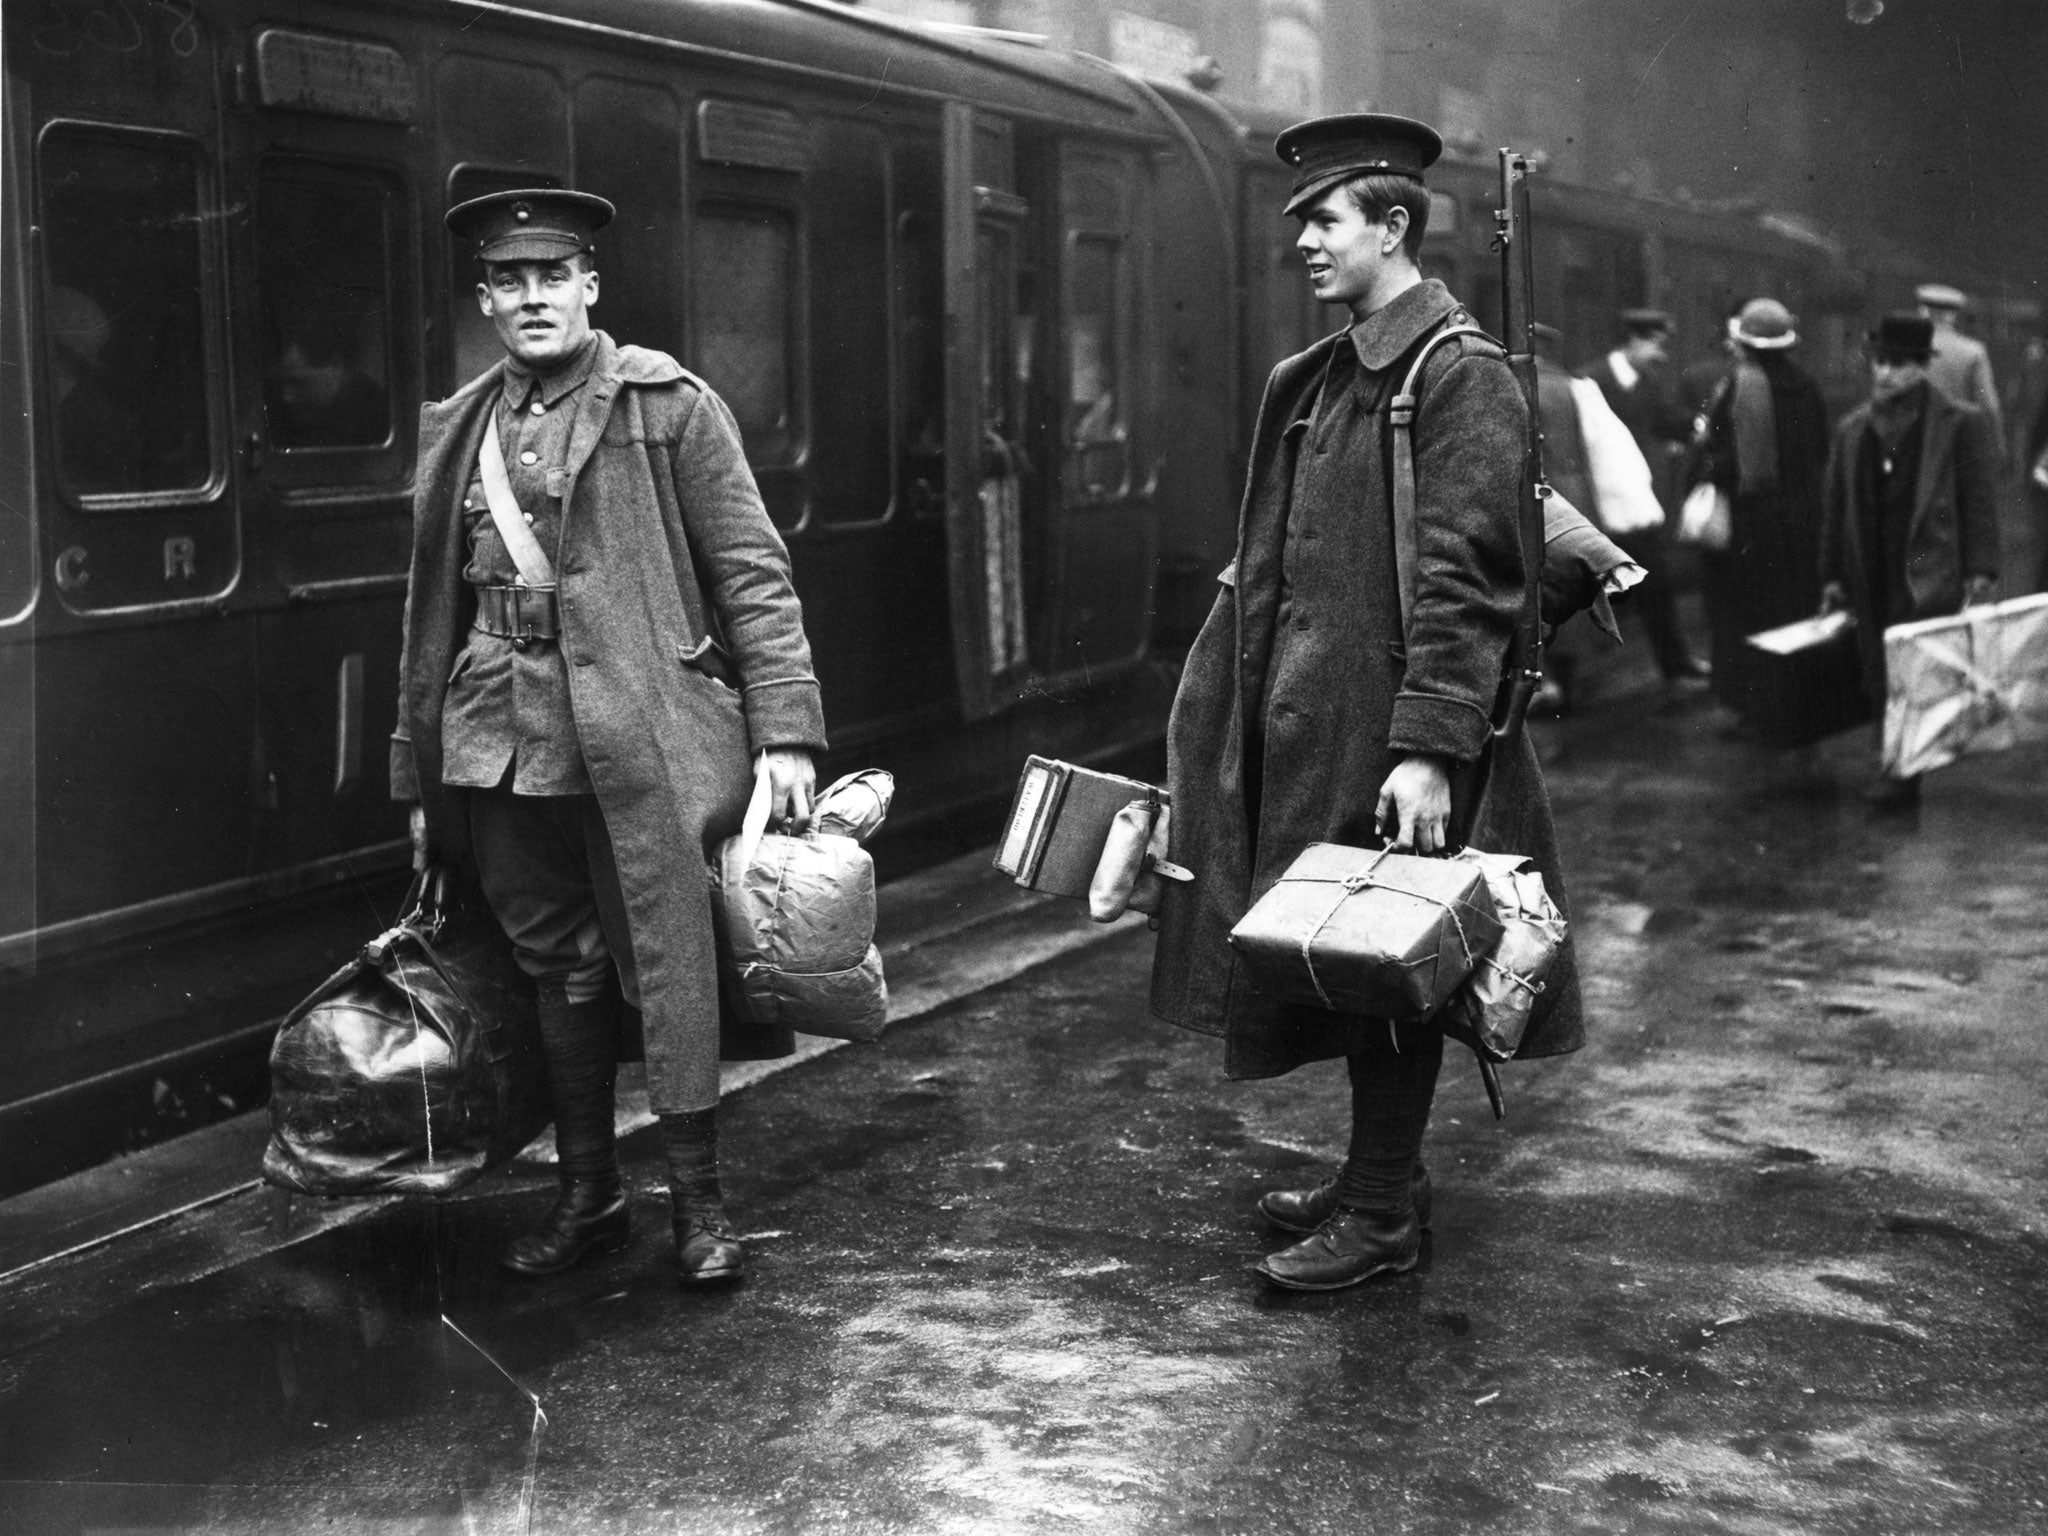 Two soldiers on the concourse at Victoria station, London, about to leave for the front line. They are carrying parcels full of food and other provisions.